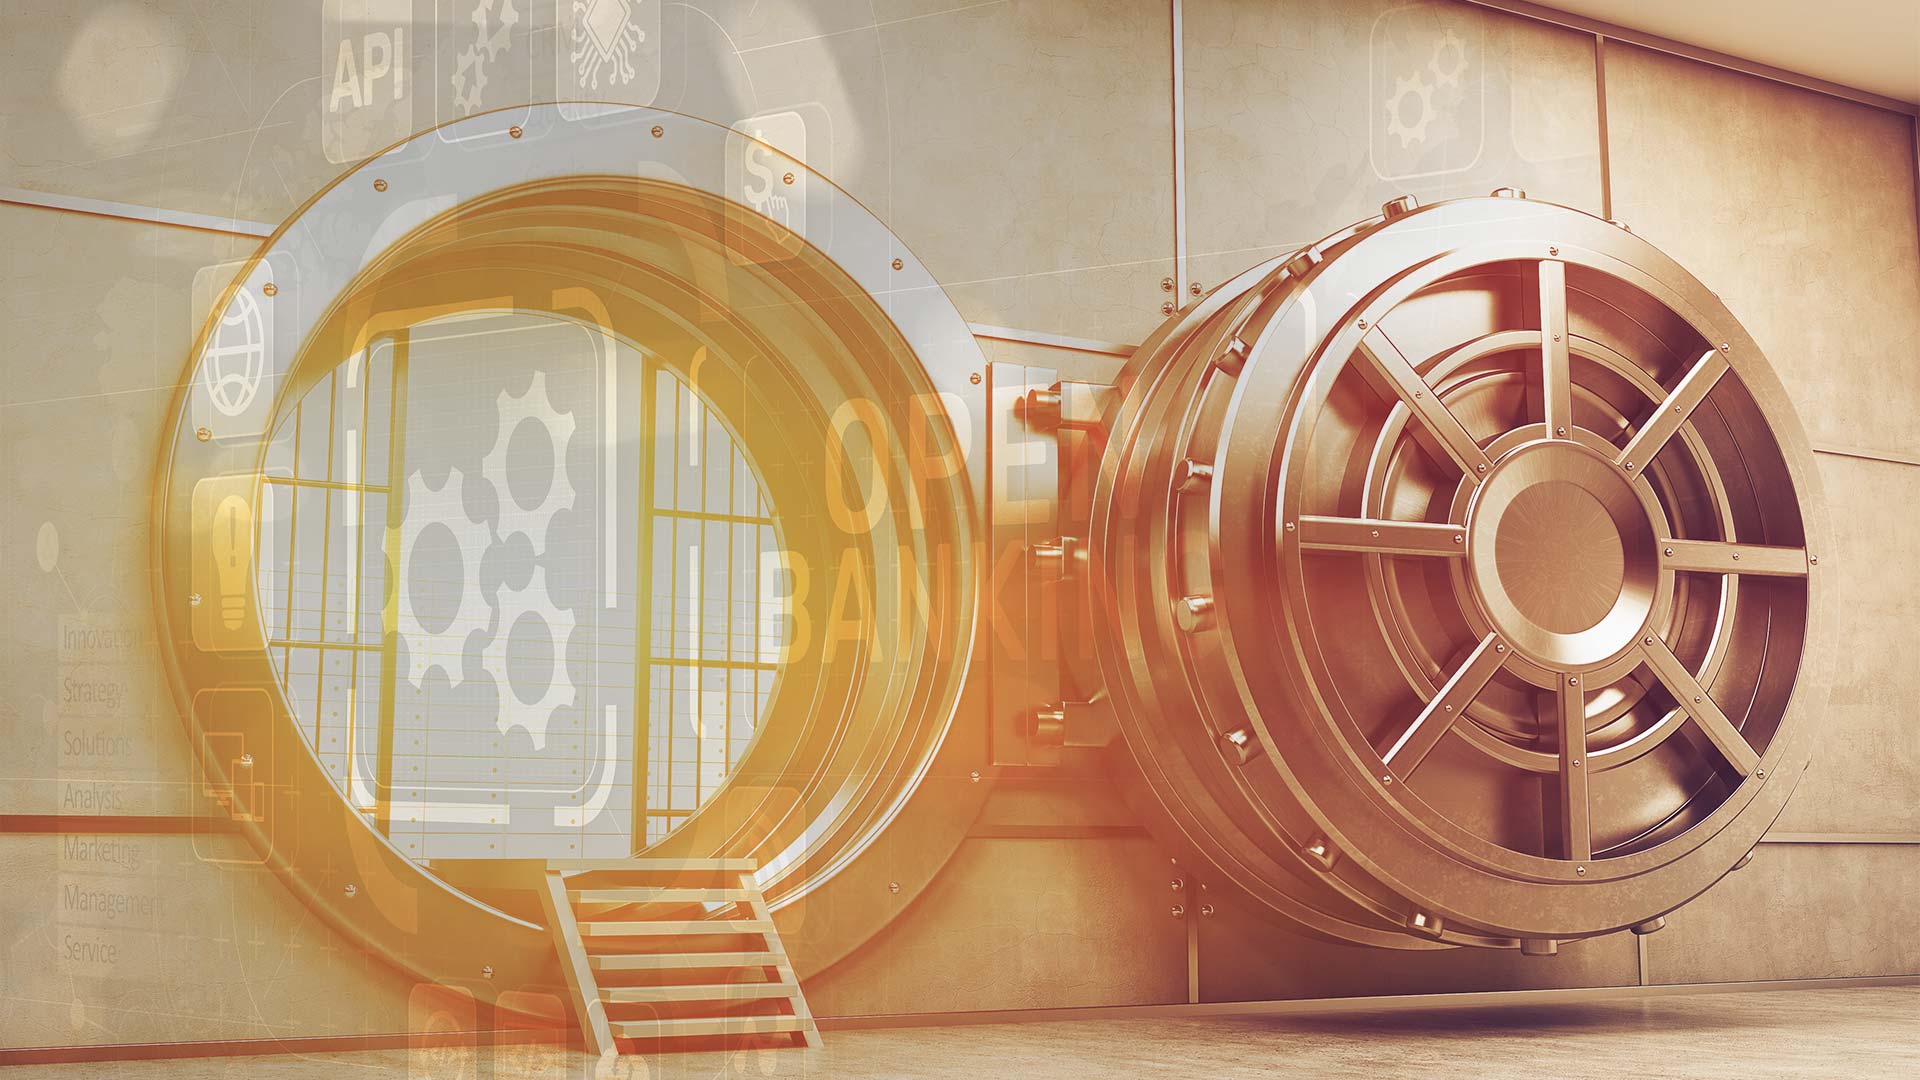 Open bank vault with API graphics overlayed